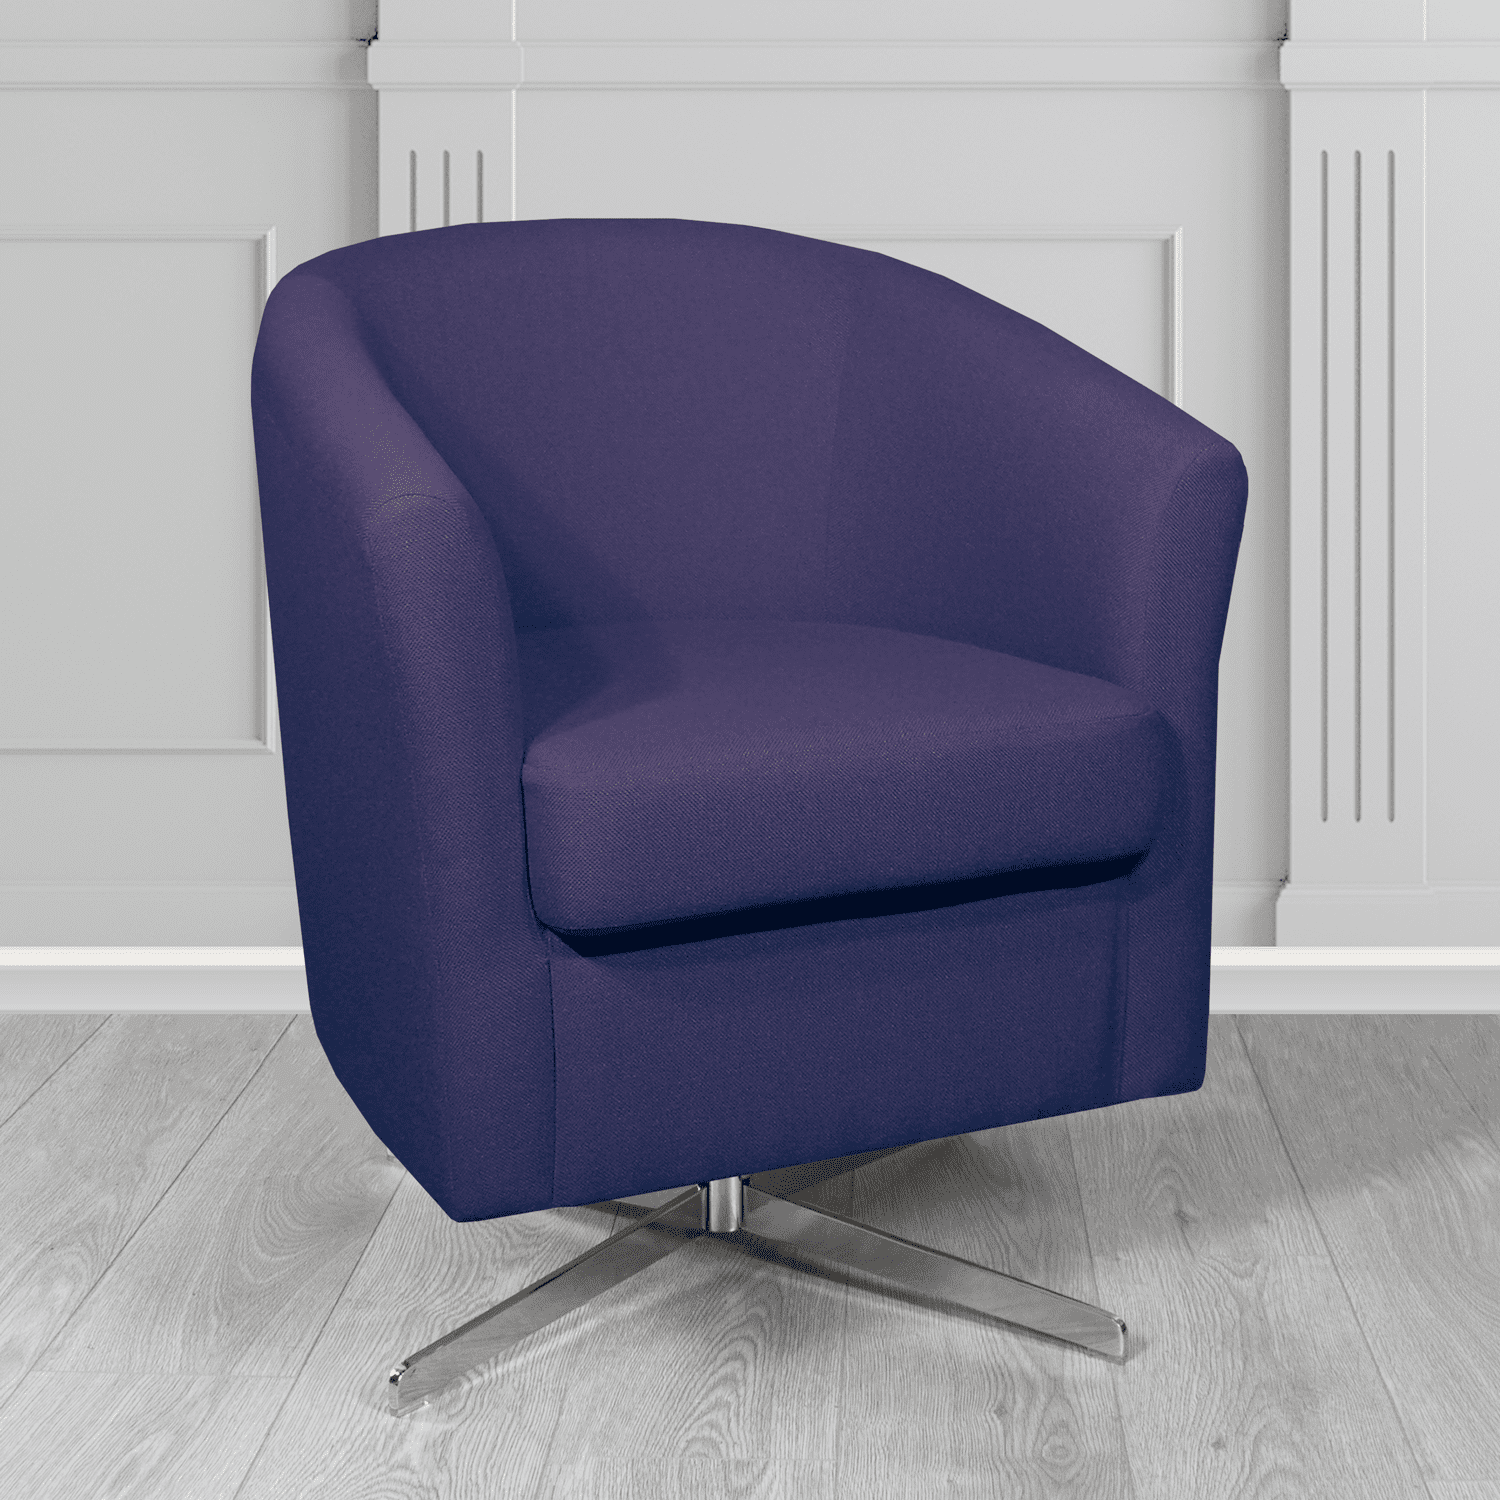 Cannes Swivel Tub Chair in Mainline Plus Prudence IF250 Crib 5 Fabric - The Tub Chair Shop